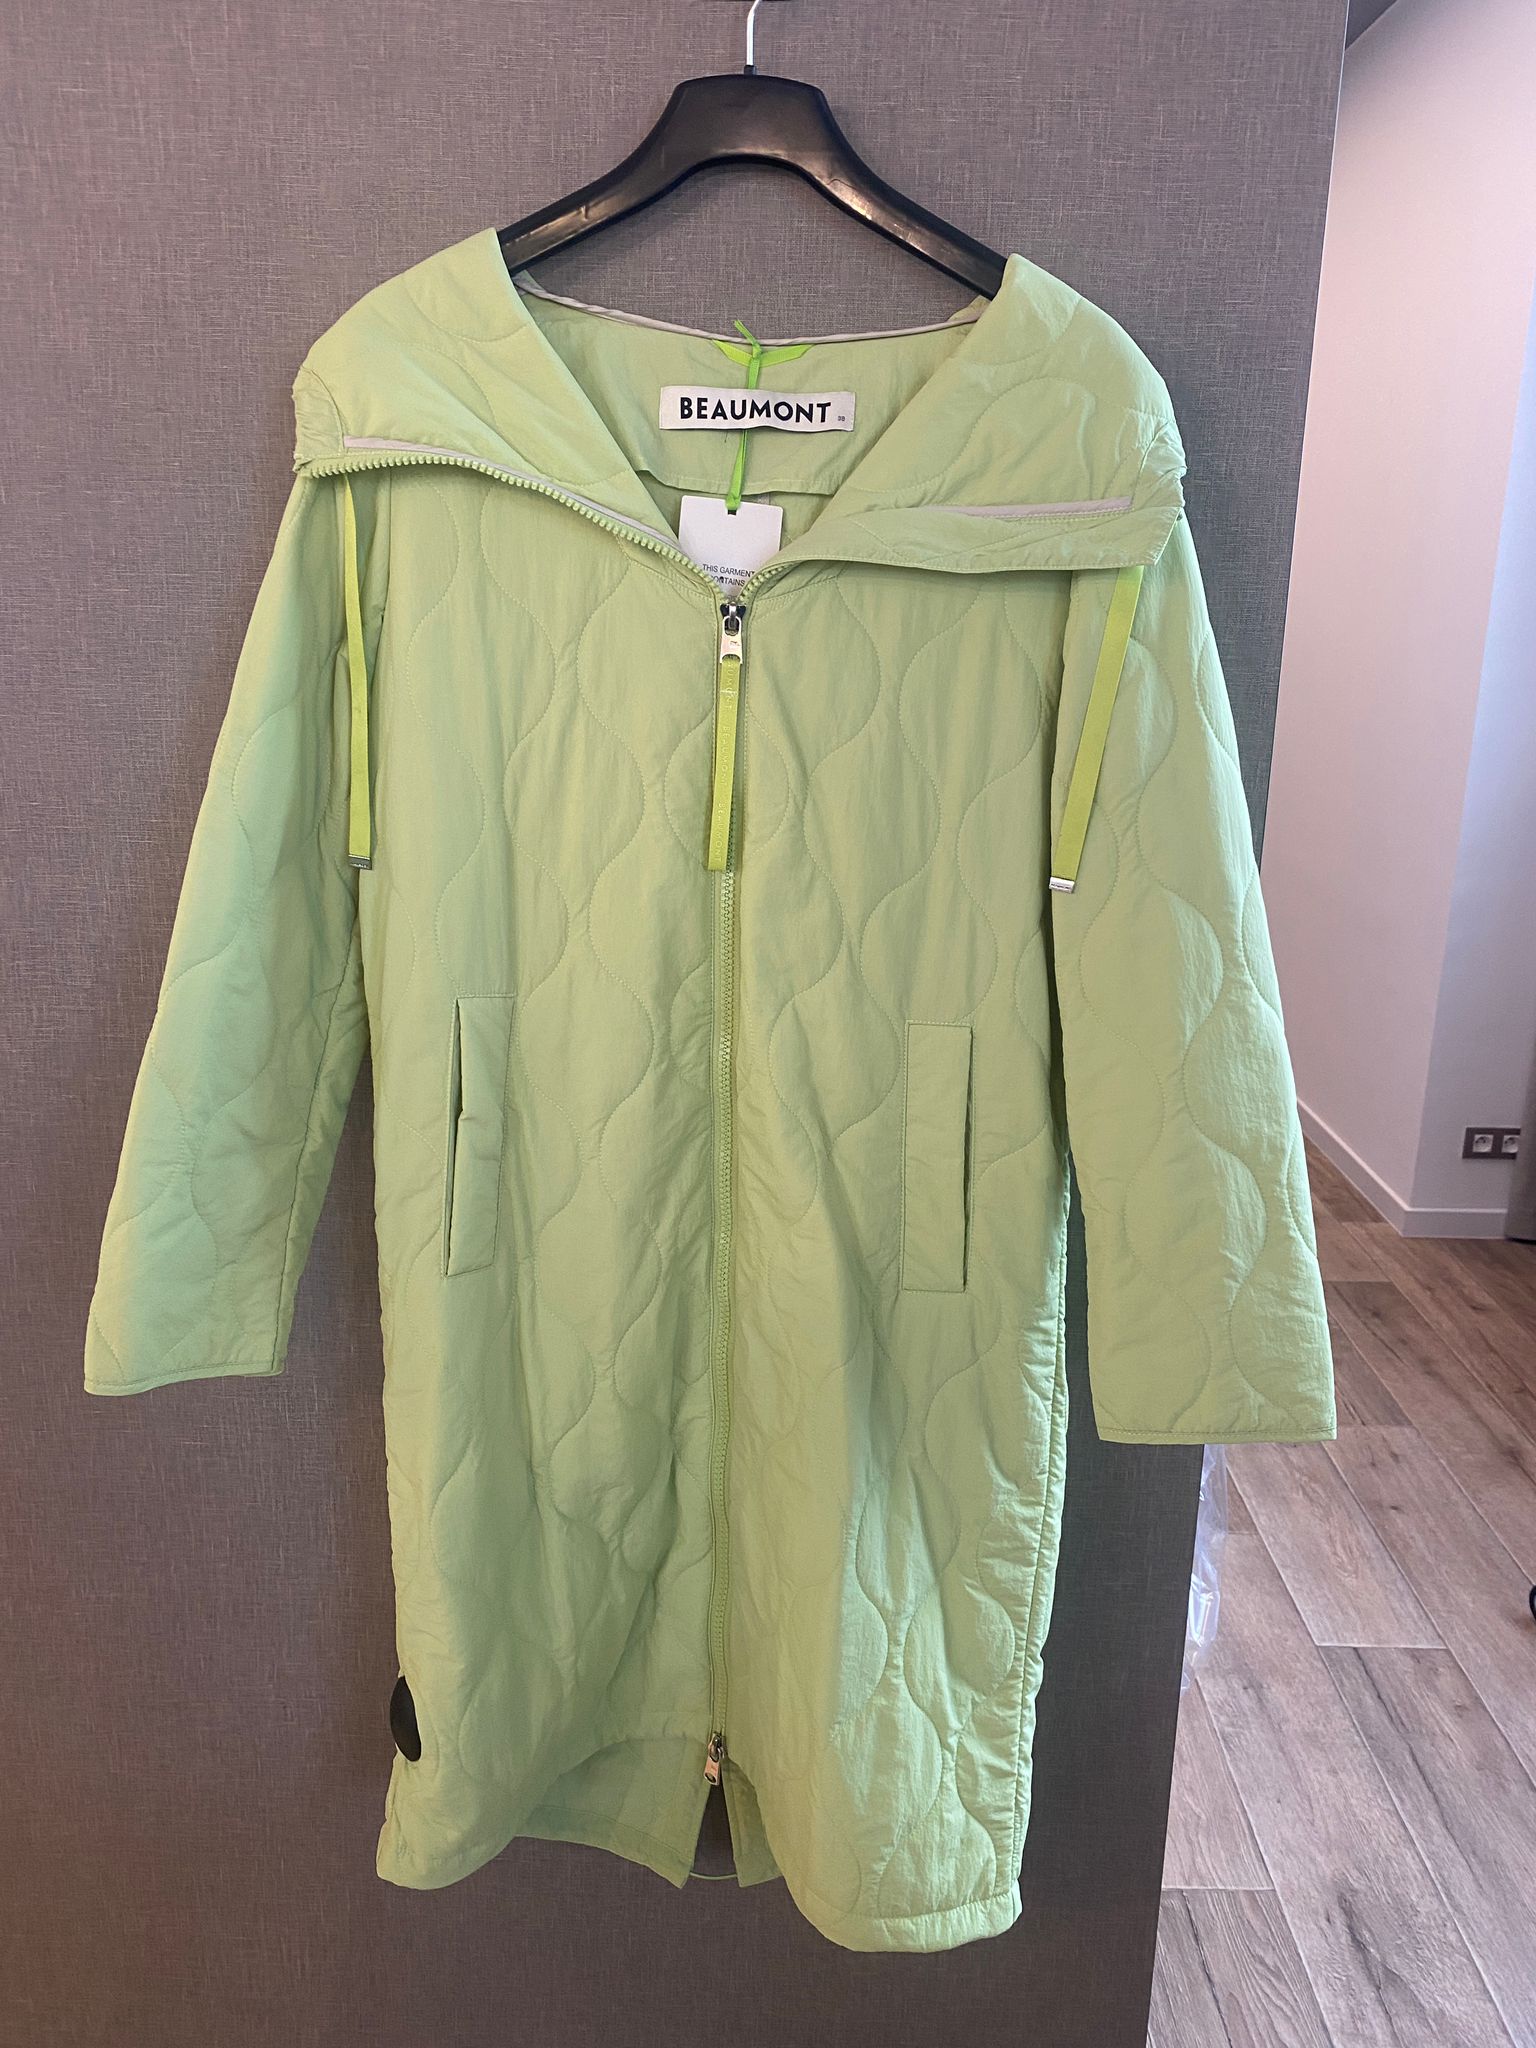 Cardigan Lime Beaumont (Chyler/6230)